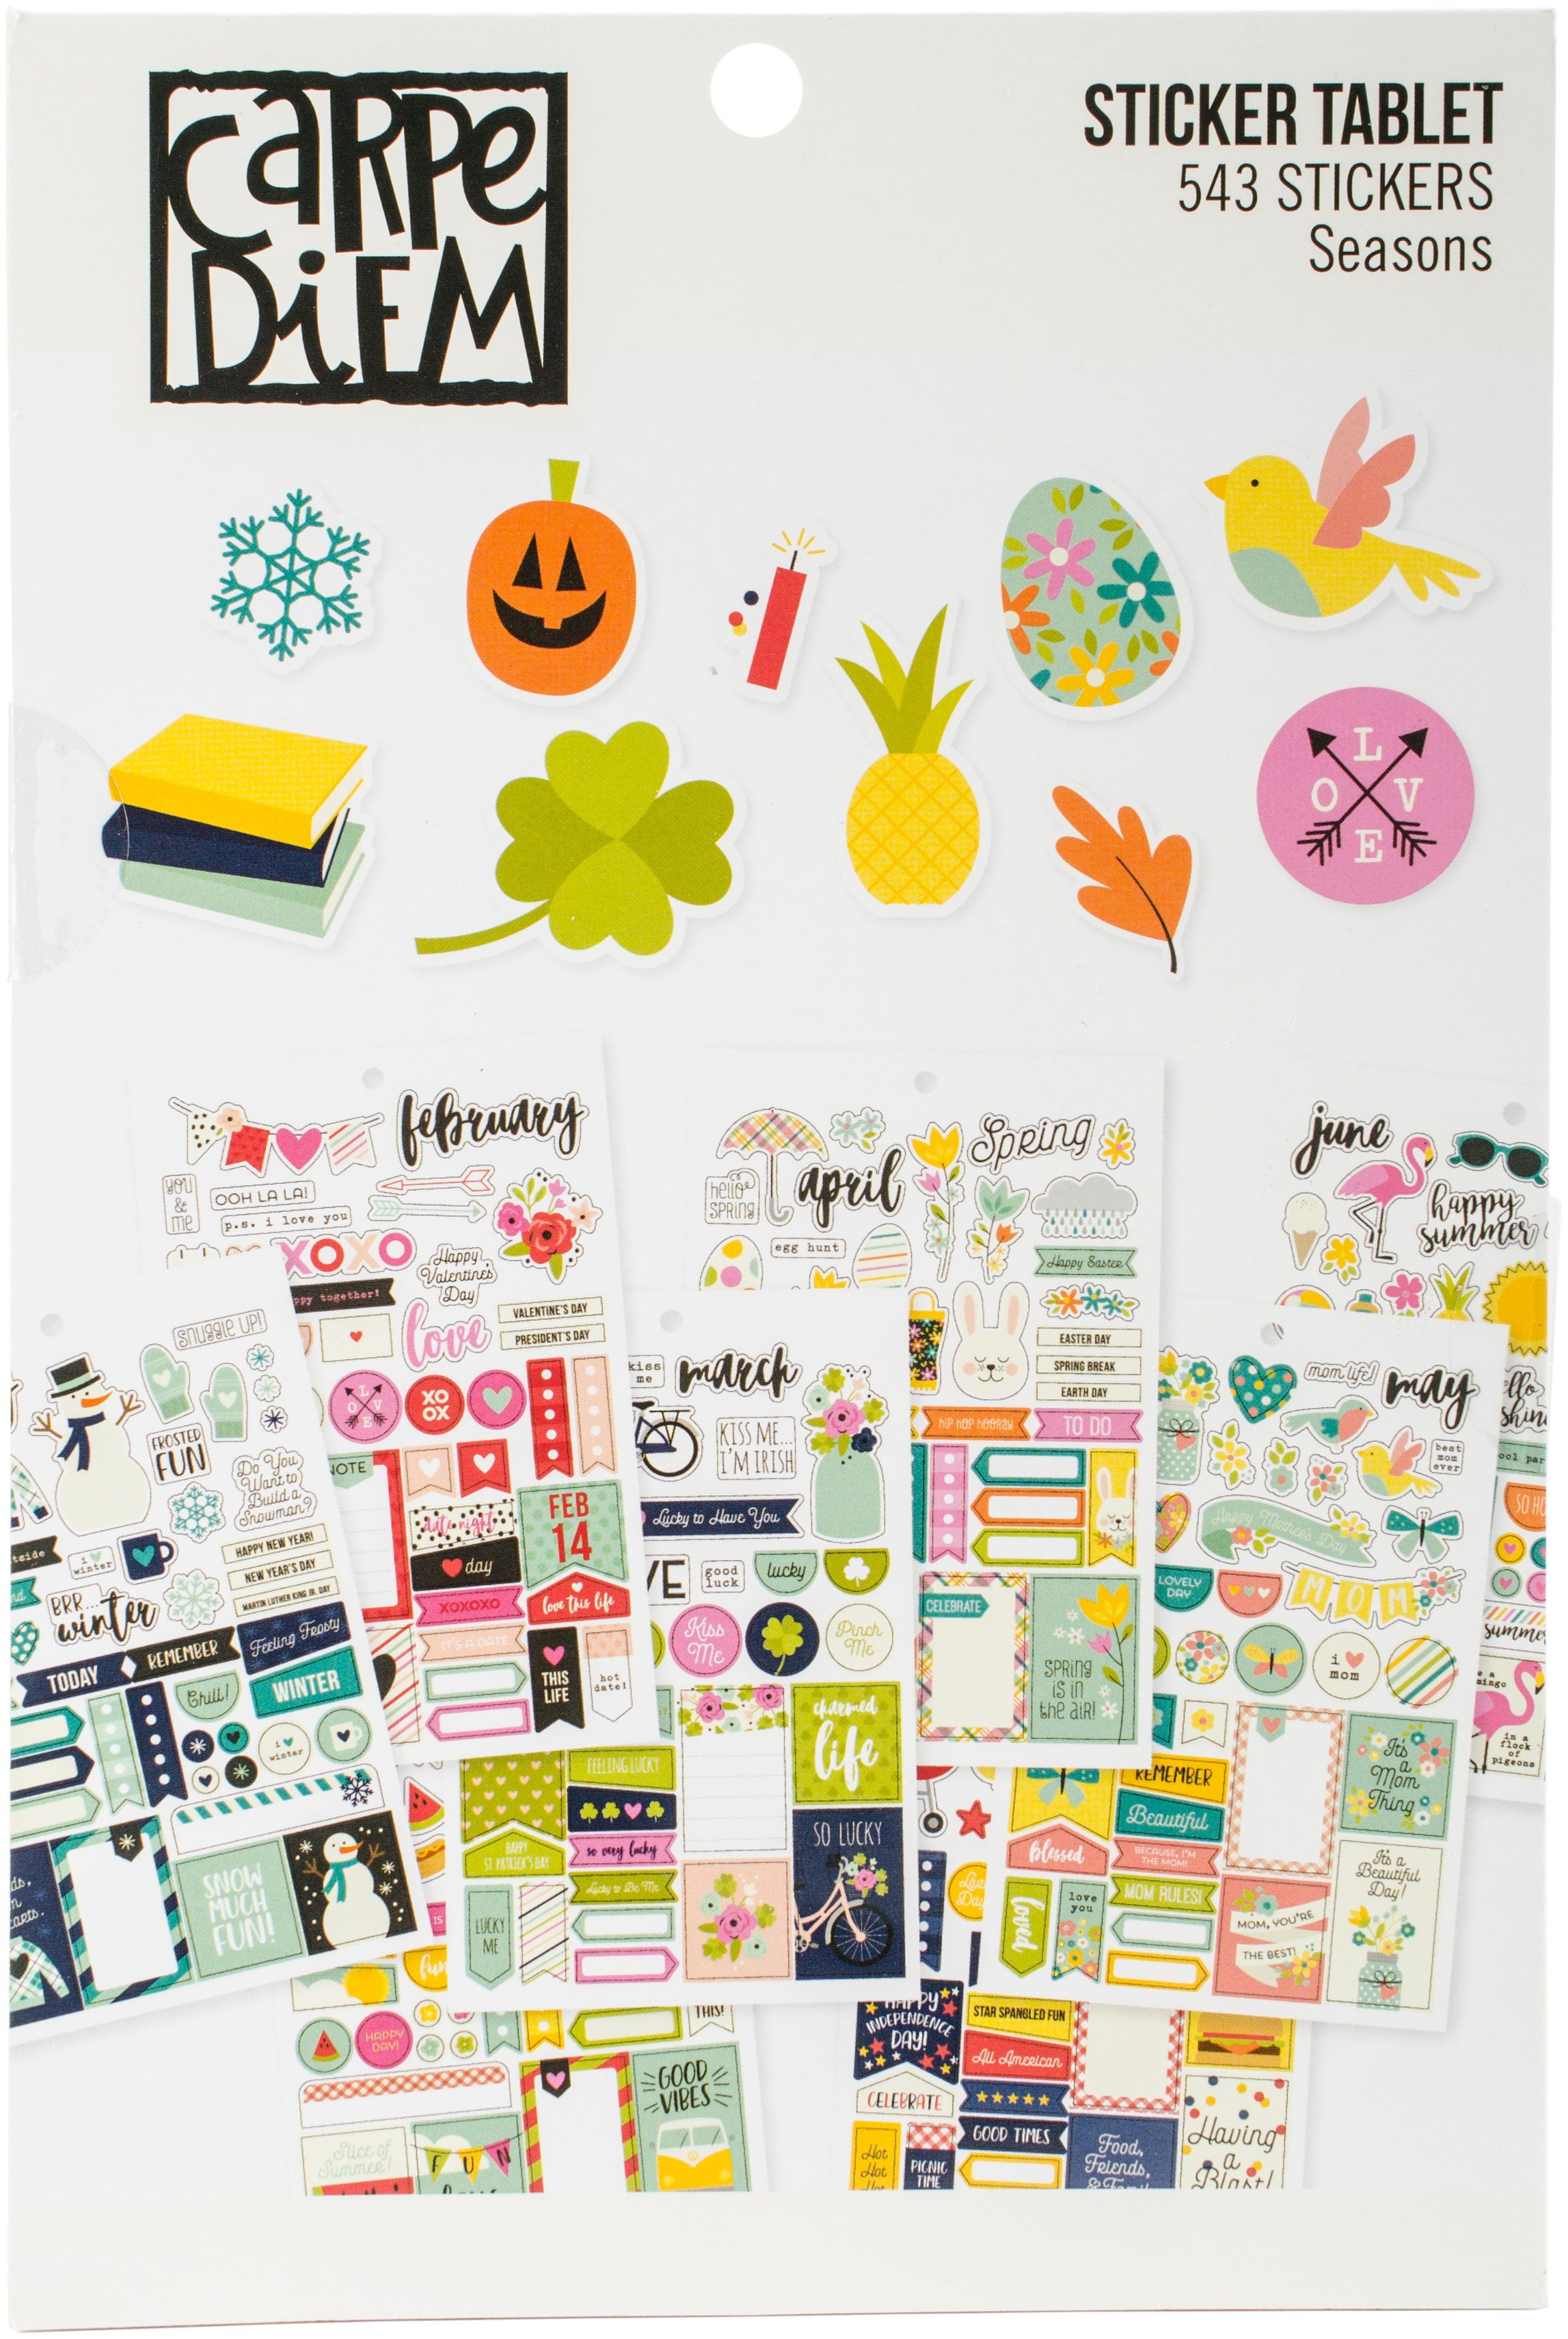 Create 365 Planner Stickers 5 Sheets/Pkg Good Food 673807993037